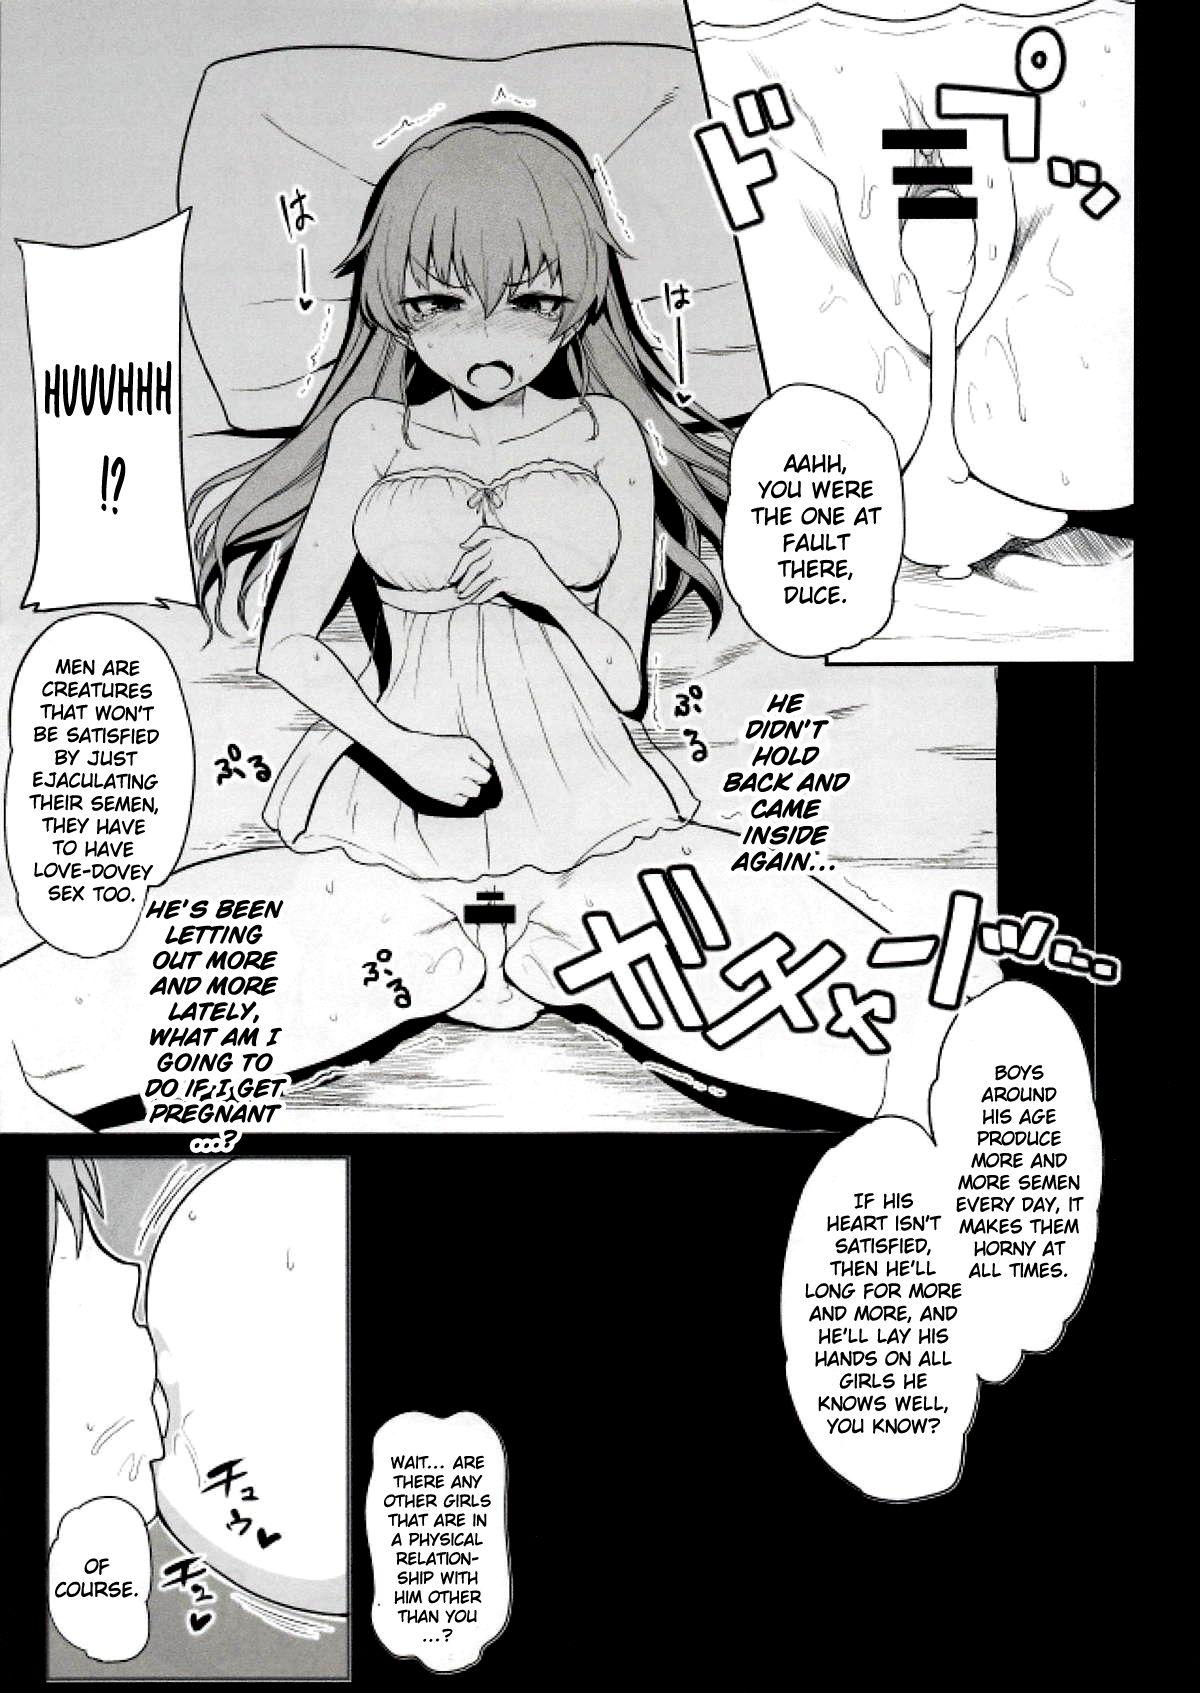 Woman Raise wa Duce no Otouto ni Naritai | I Want To Become Duce's Little Brother In The Future! - Girls und panzer Hardcore Rough Sex - Page 5